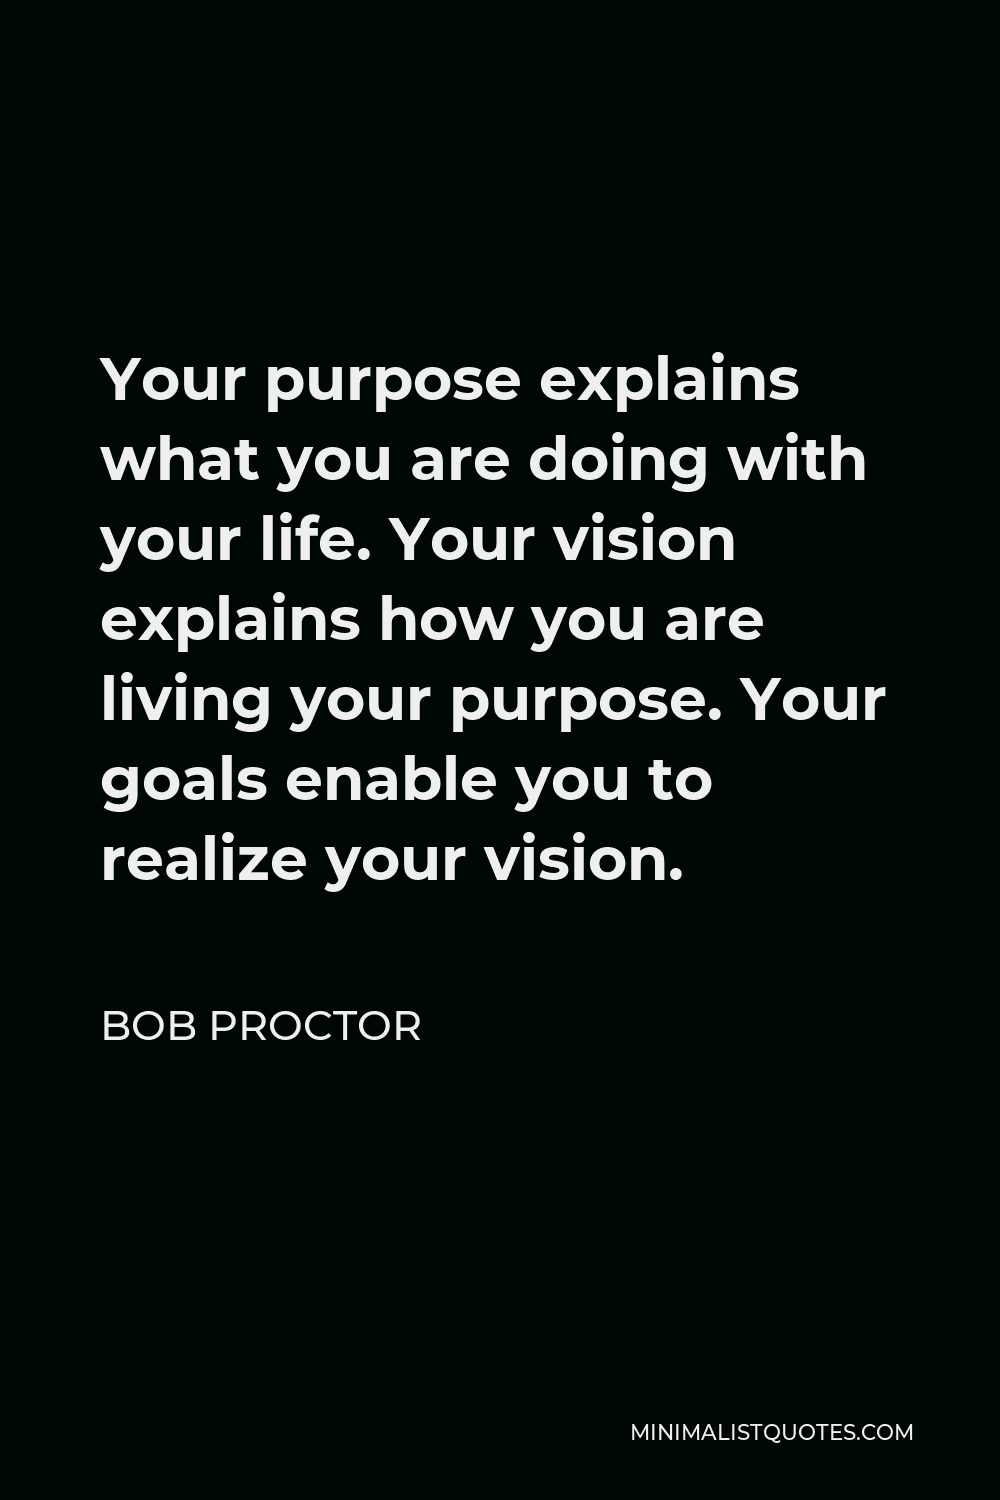 Bob Proctor Quote - Your purpose explains what you are doing with your life. Your vision explains how you are living your purpose. Your goals enable you to realize your vision.